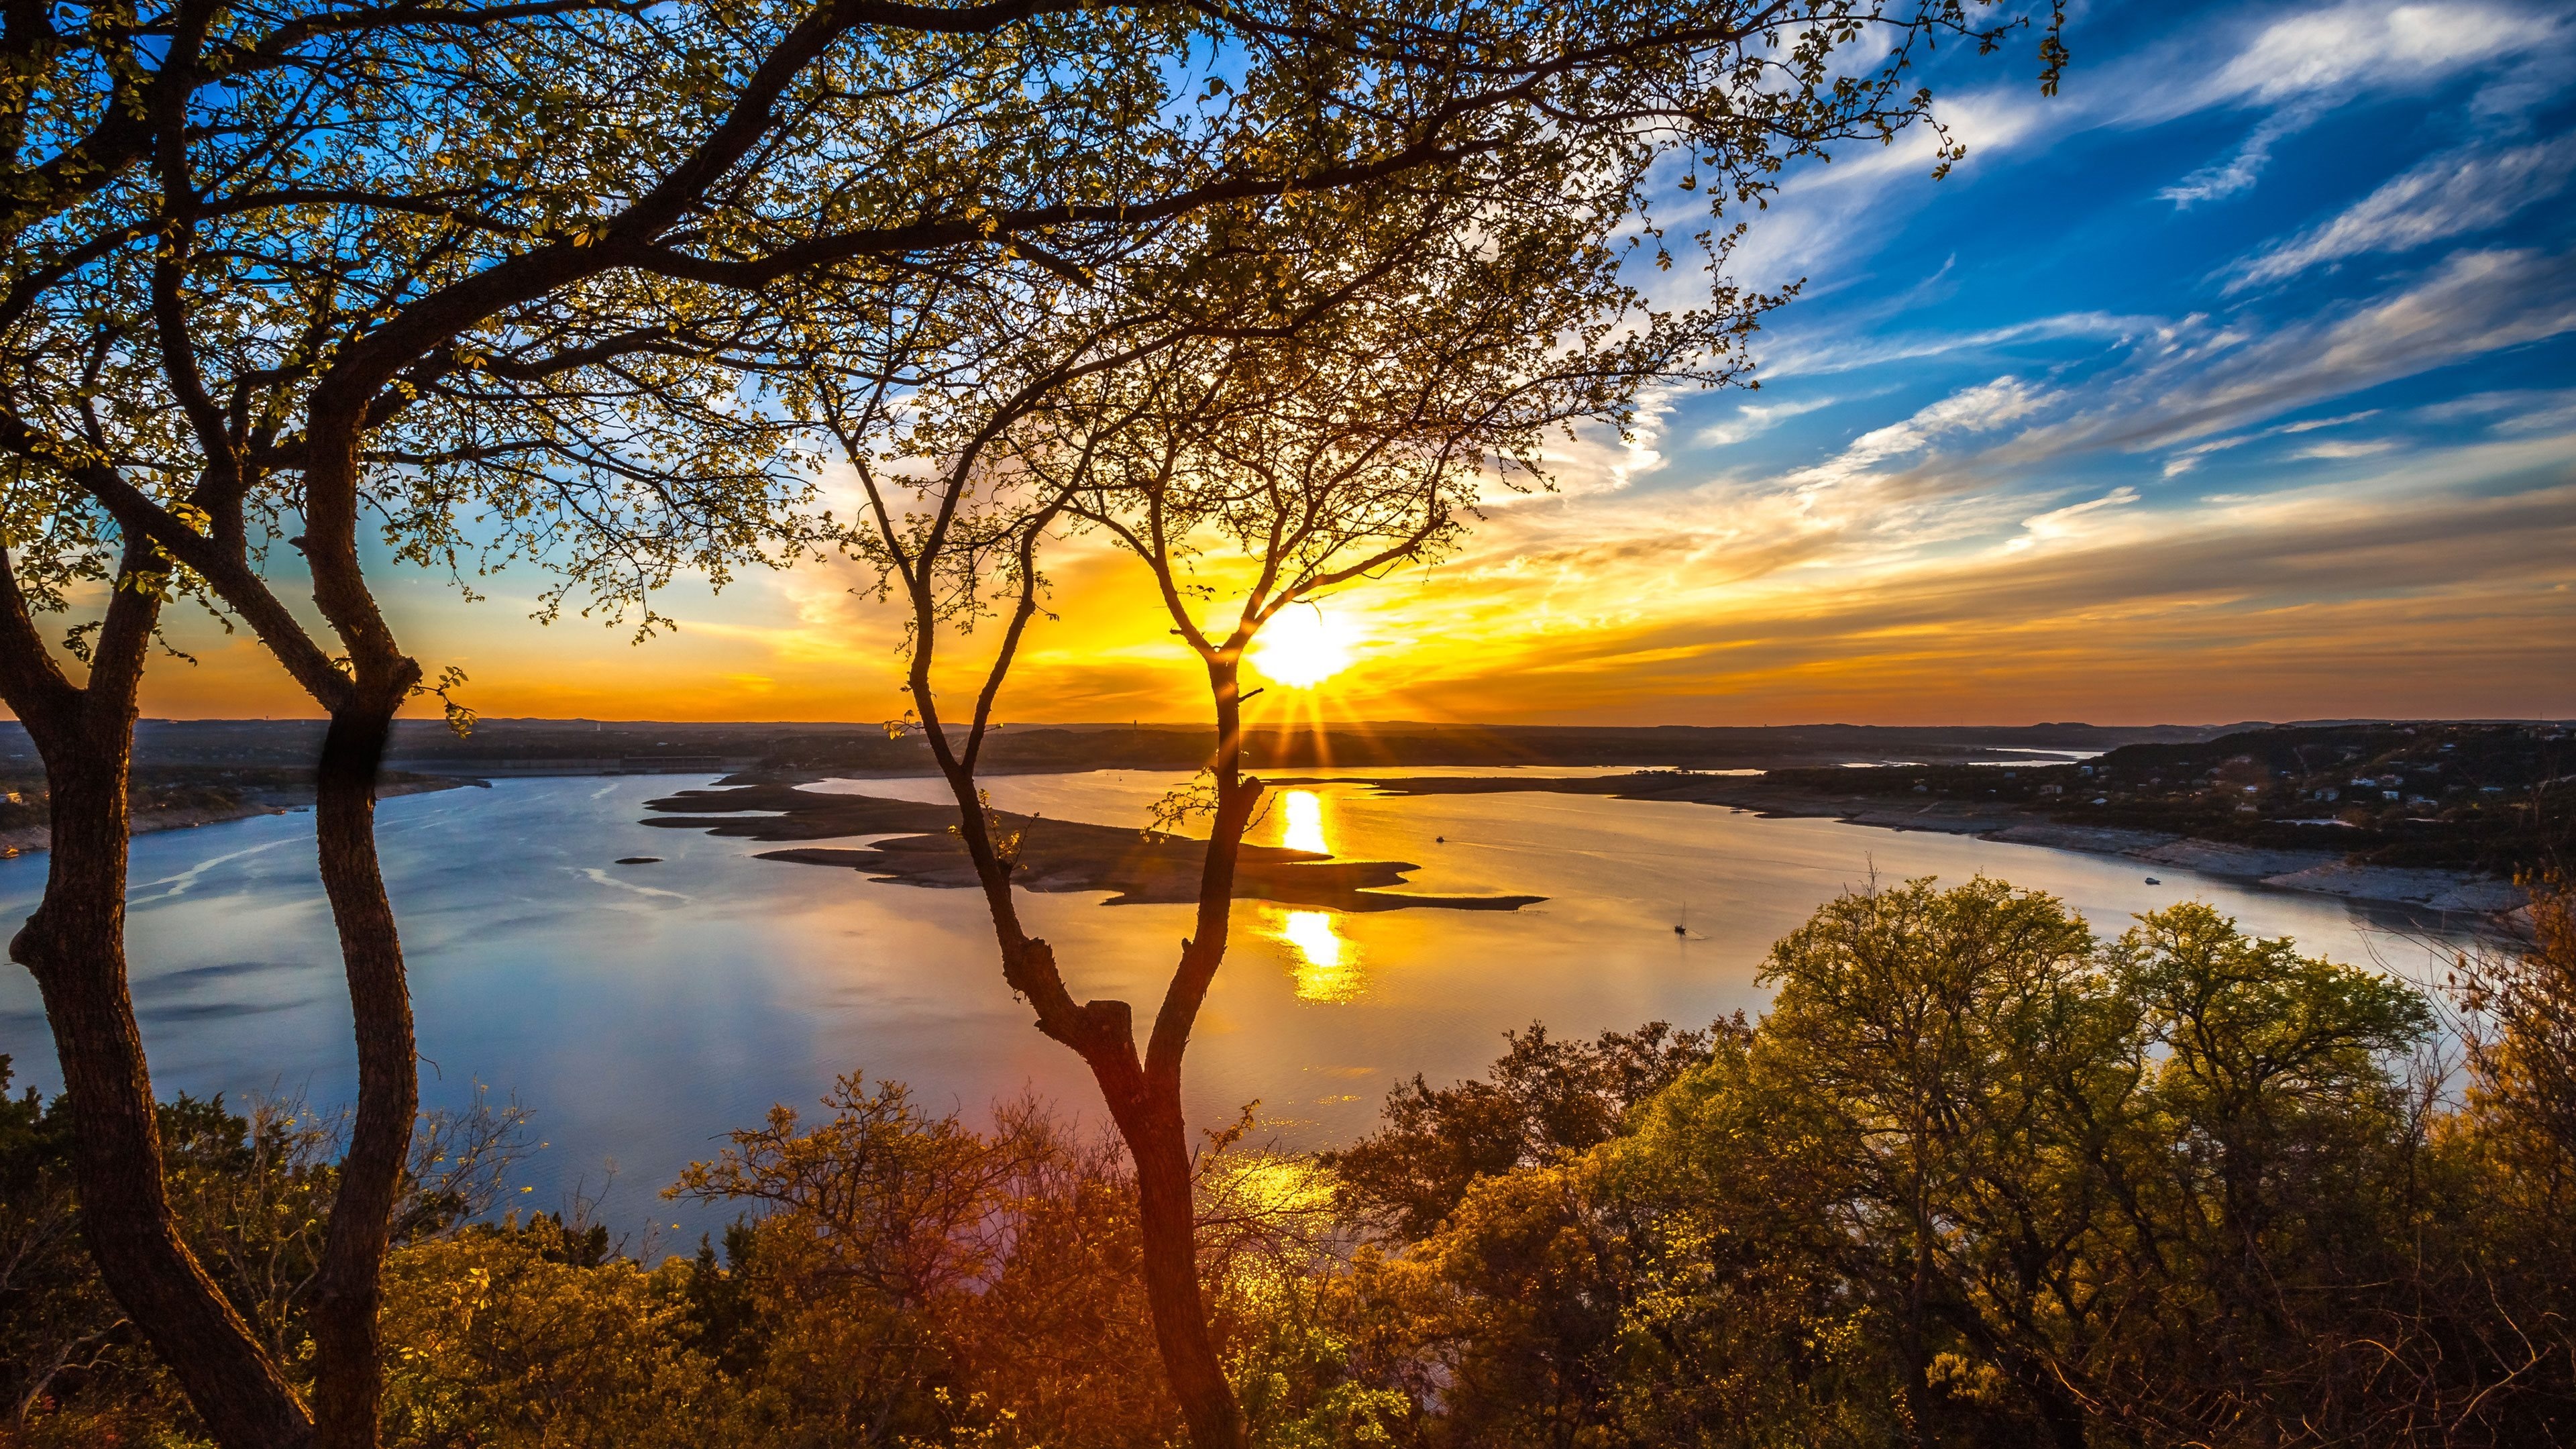 Lake Travis sunset, Autumn in Colorado, American landscapes, High-quality pictures, 3840x2160 4K Desktop